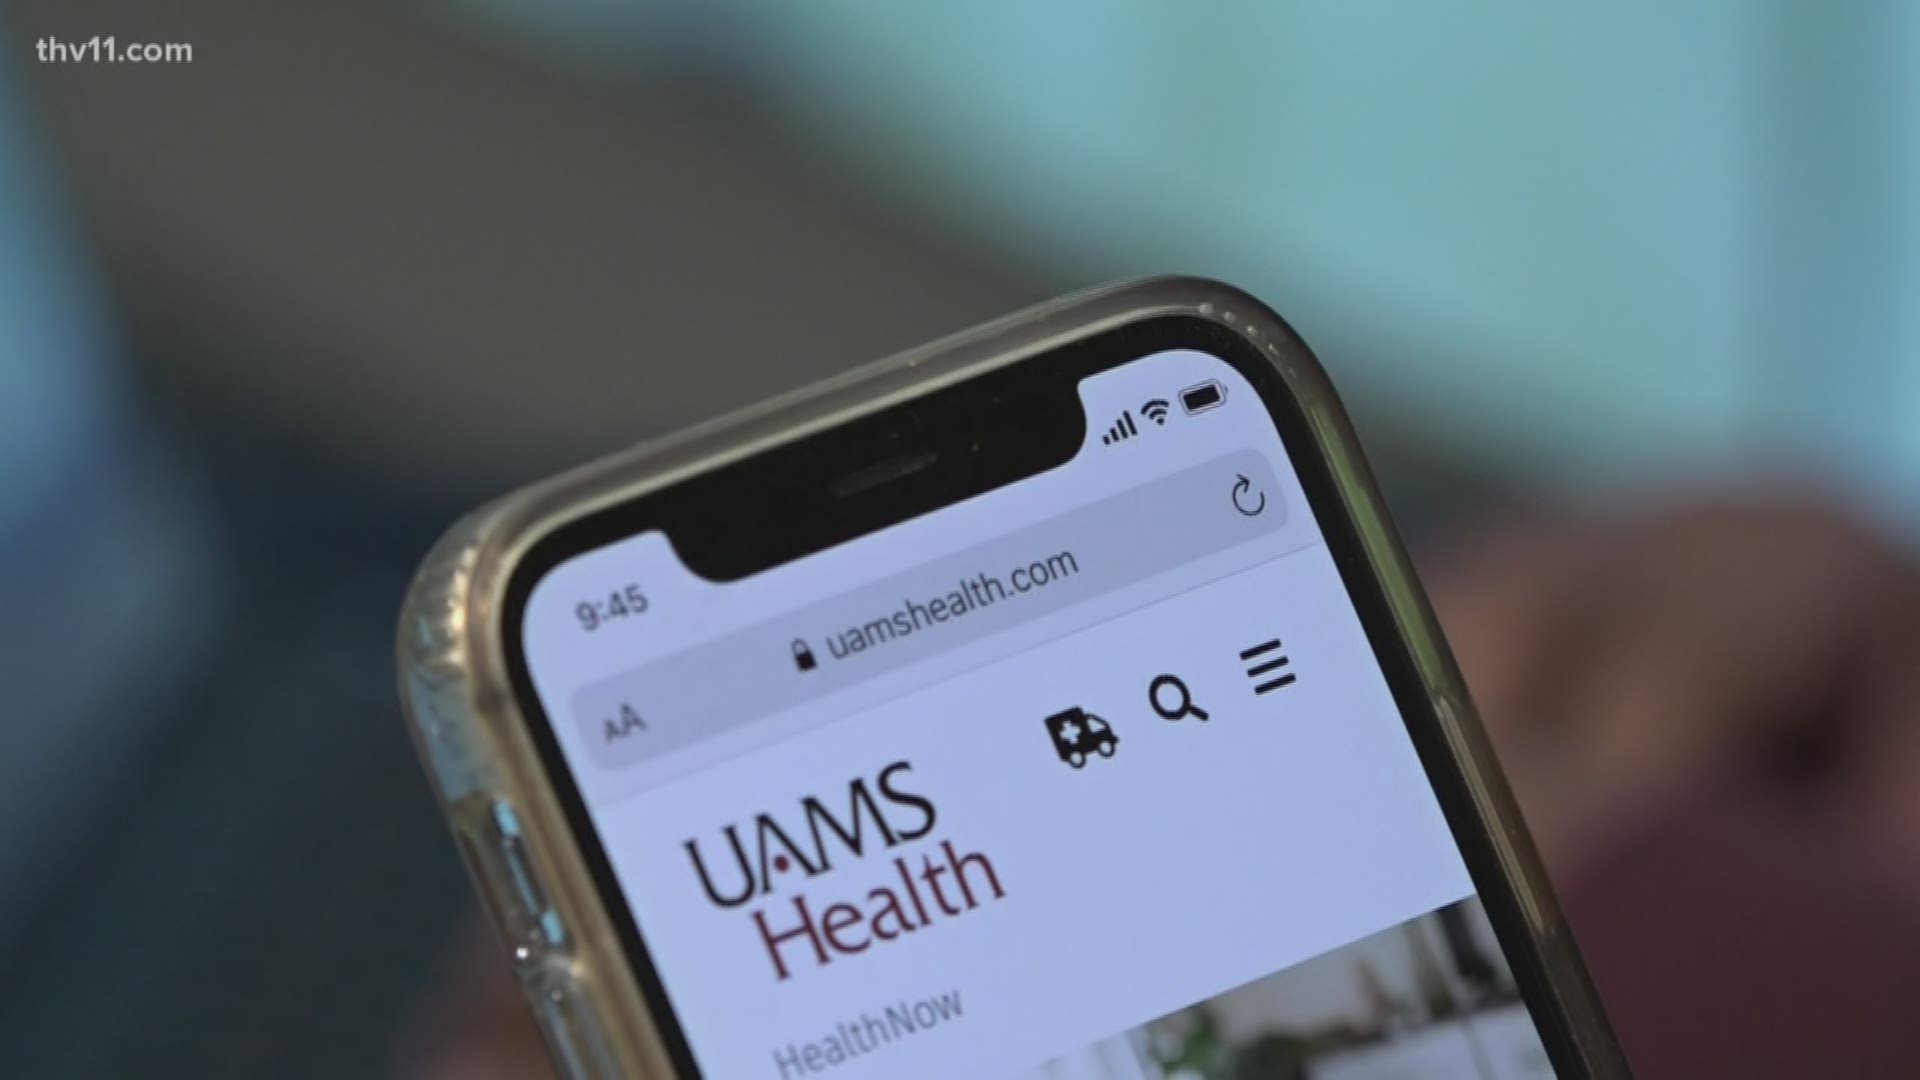 UAMS has a new program that's connecting patients with healthcare providers in real time.